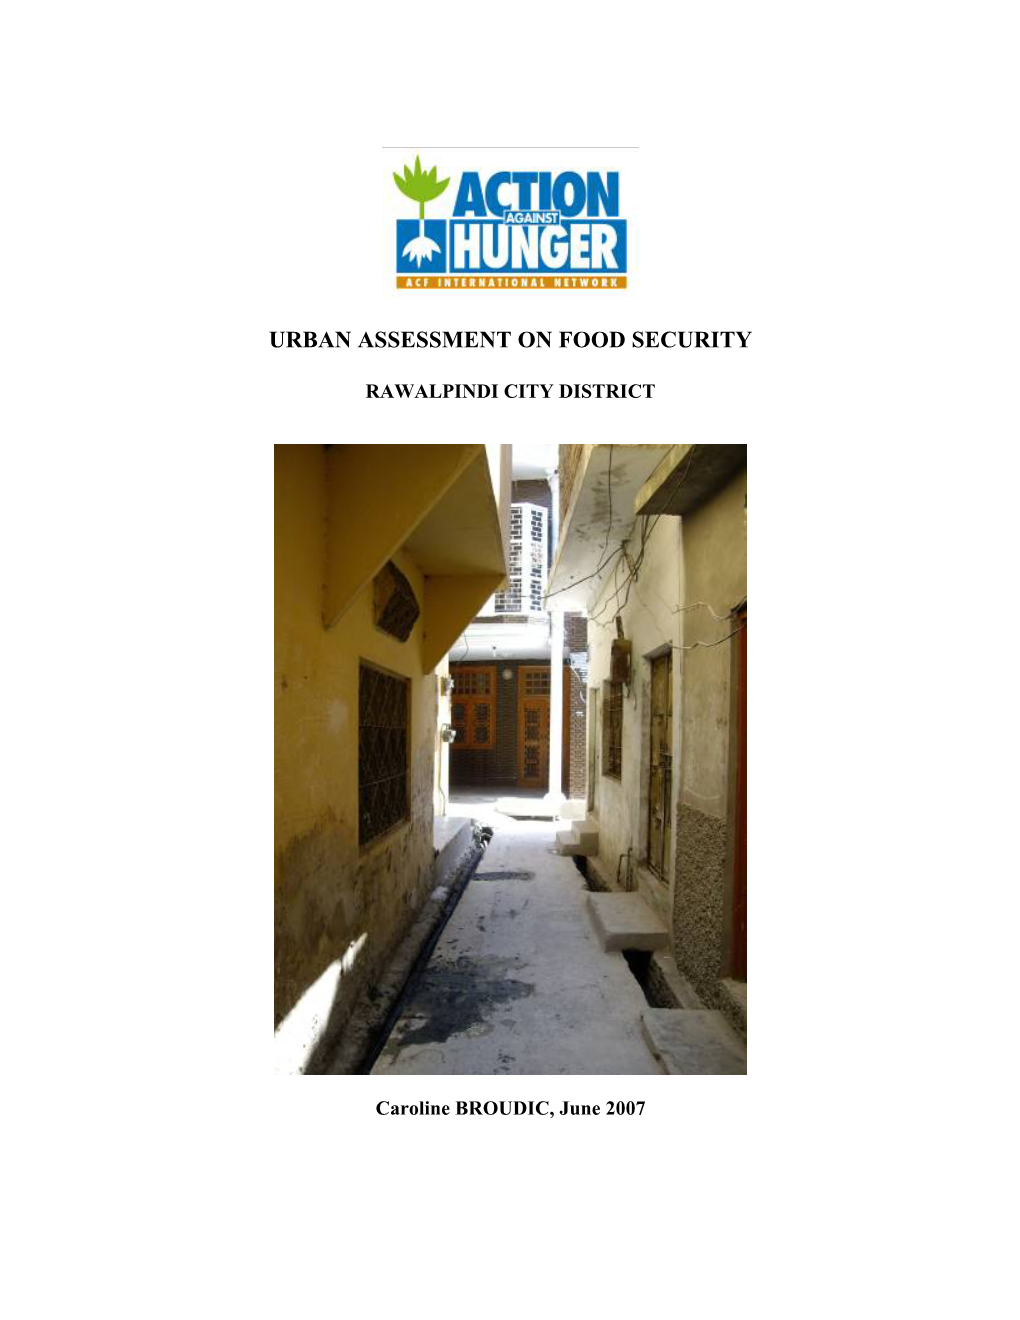 Urban Assessment on Food Security